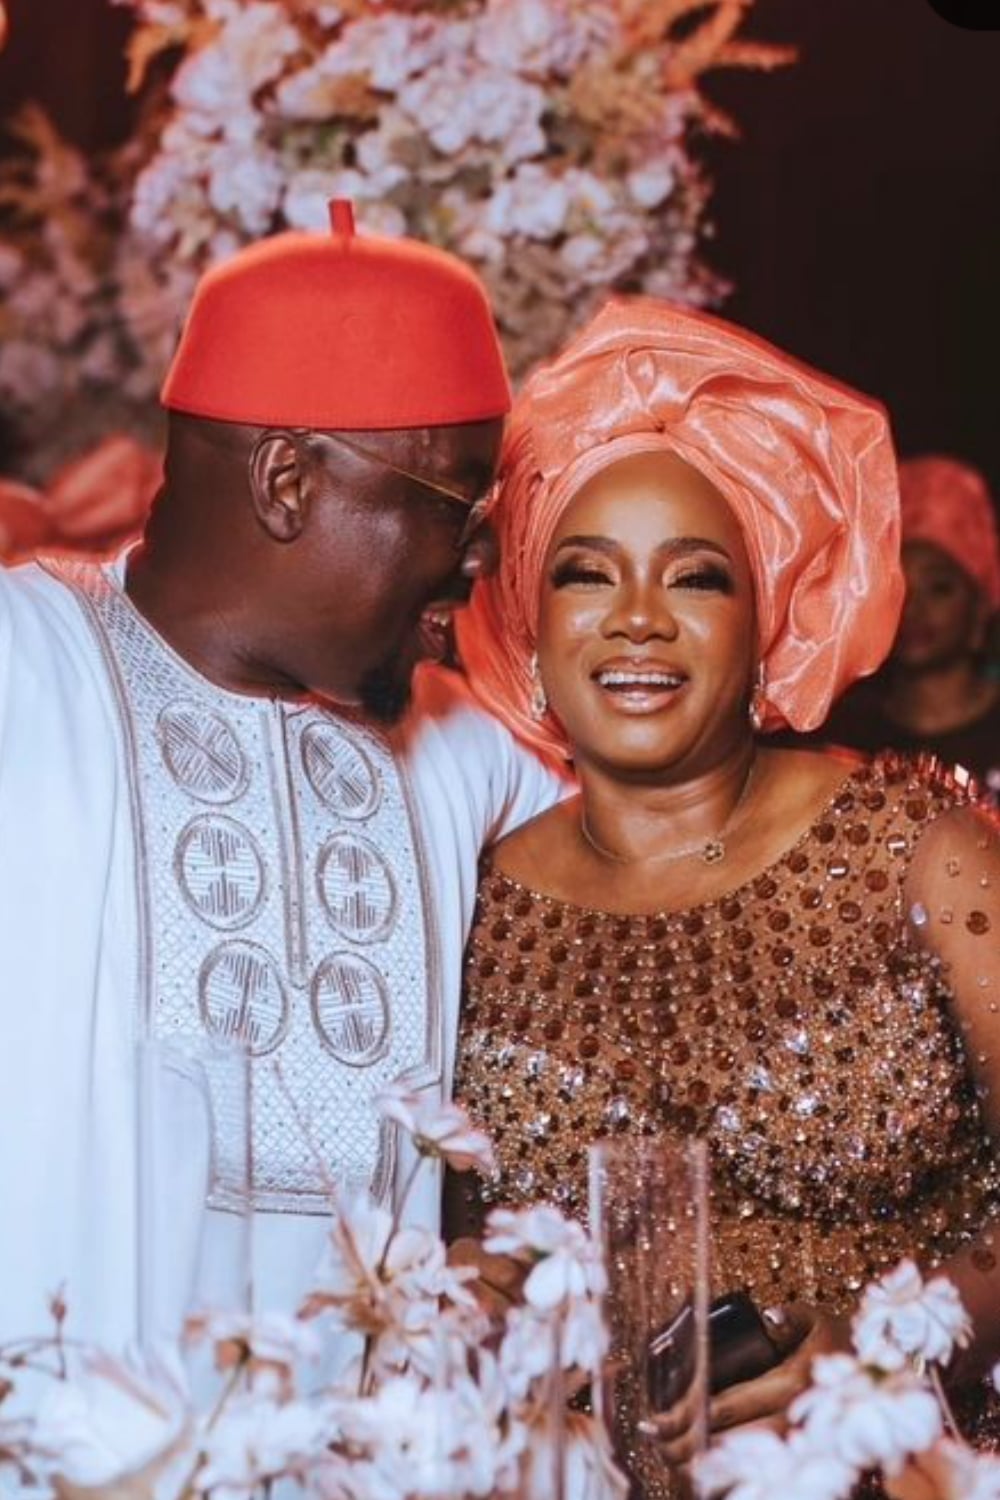 Man teases obi cubana as he celebrates 15th traditional wedding anniversary with his wife